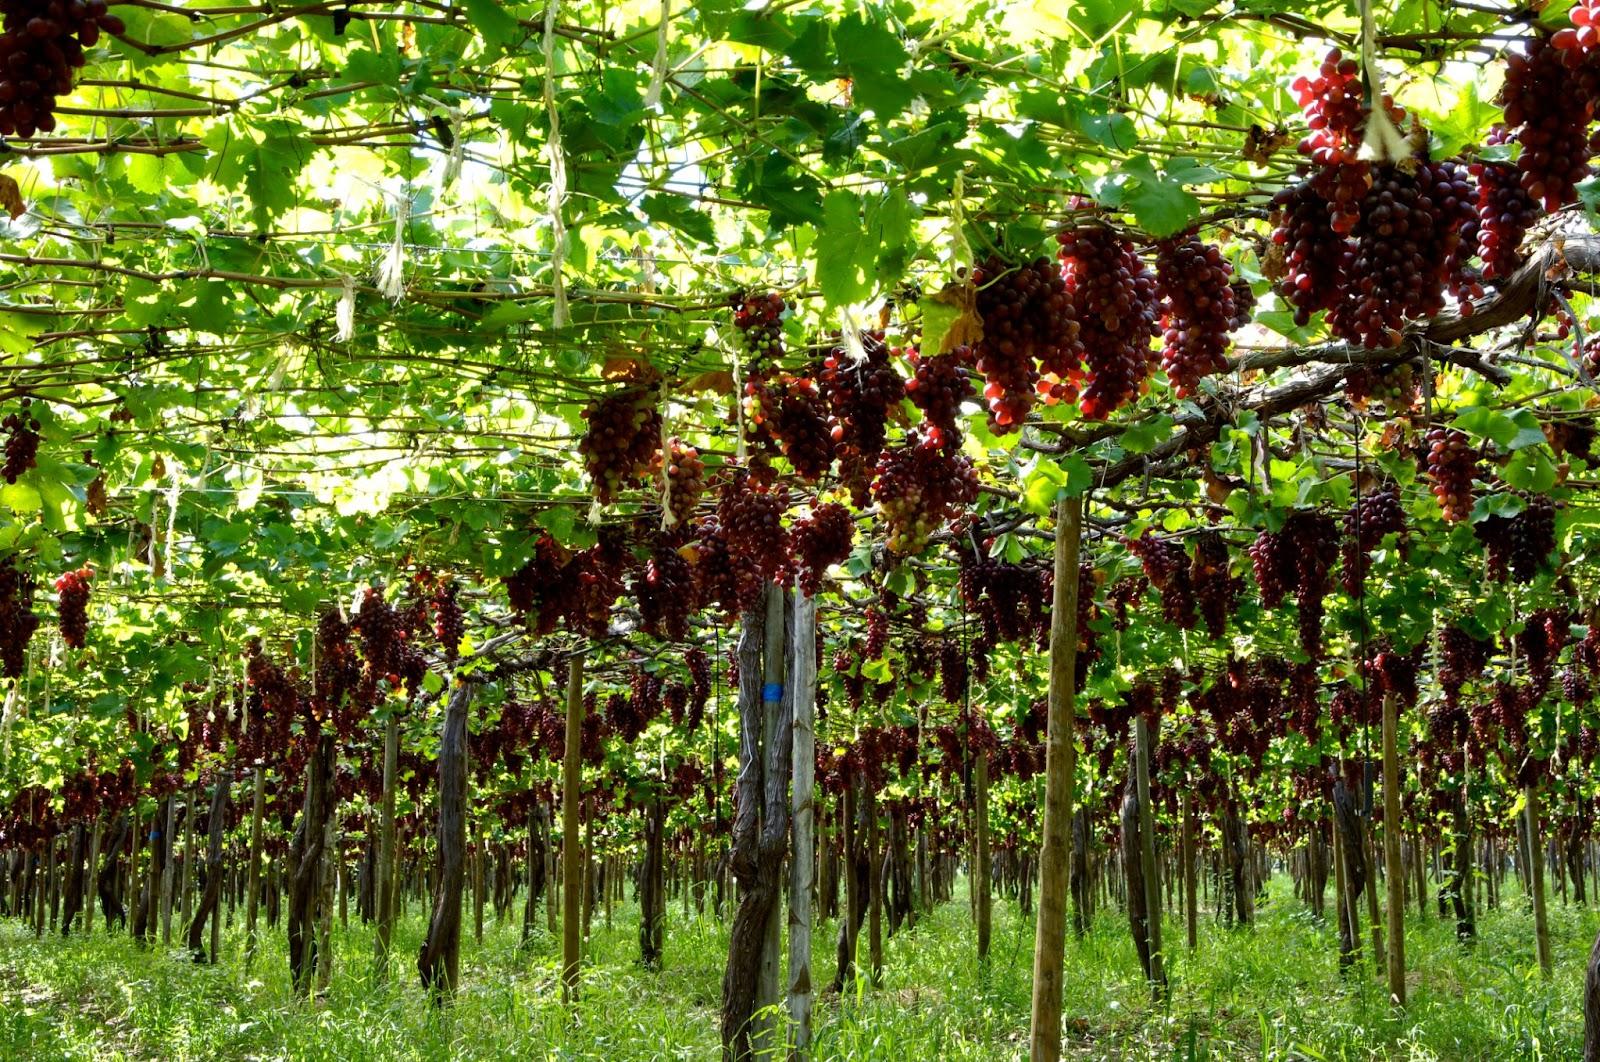 Brasil is one of the most dynamic wine producing countries. (Photo: Pulsar Imagens/stock.adobe.com)